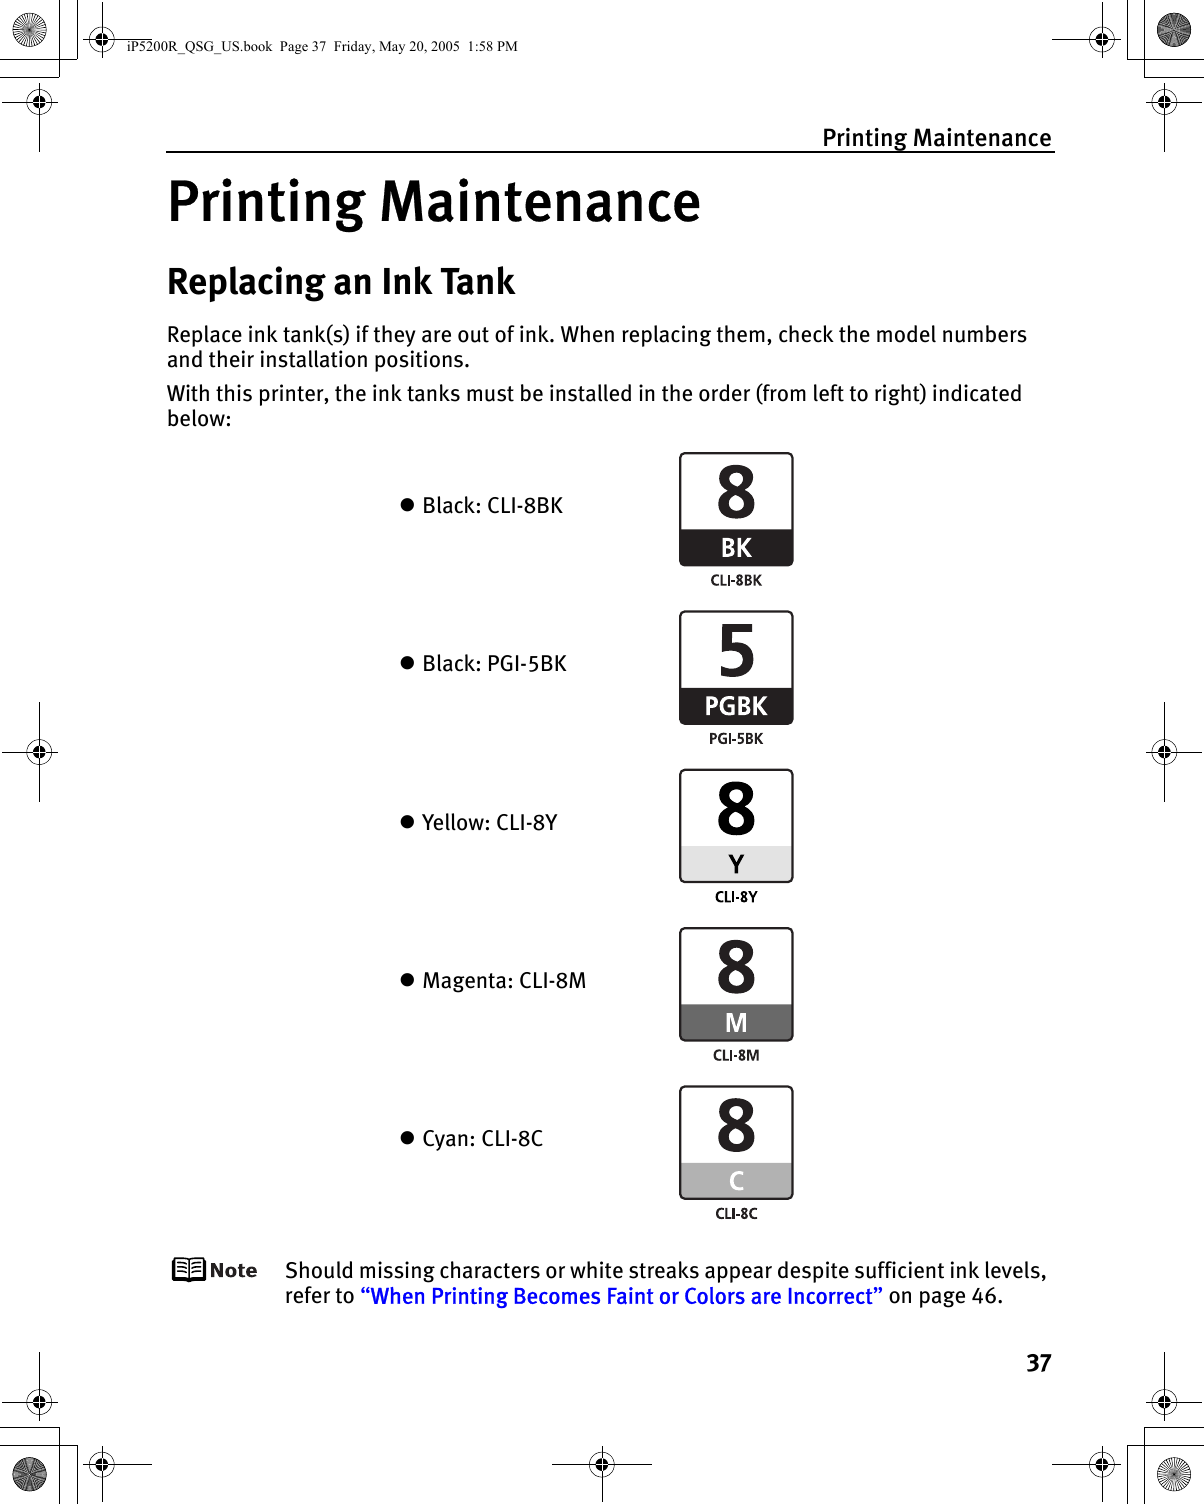 Printing Maintenance37Printing MaintenanceReplacing an Ink TankReplace ink tank(s) if they are out of ink. When replacing them, check the model numbers and their installation positions.With this printer, the ink tanks must be installed in the order (from left to right) indicated below:Should missing characters or white streaks appear despite sufficient ink levels, refer to “When Printing Becomes Faint or Colors are Incorrect” on page 46.zBlack: CLI-8BKzBlack: PGI-5BKzYellow: CLI-8YzMagenta: CLI-8MzCyan: CLI-8CiP5200R_QSG_US.book  Page 37  Friday, May 20, 2005  1:58 PM